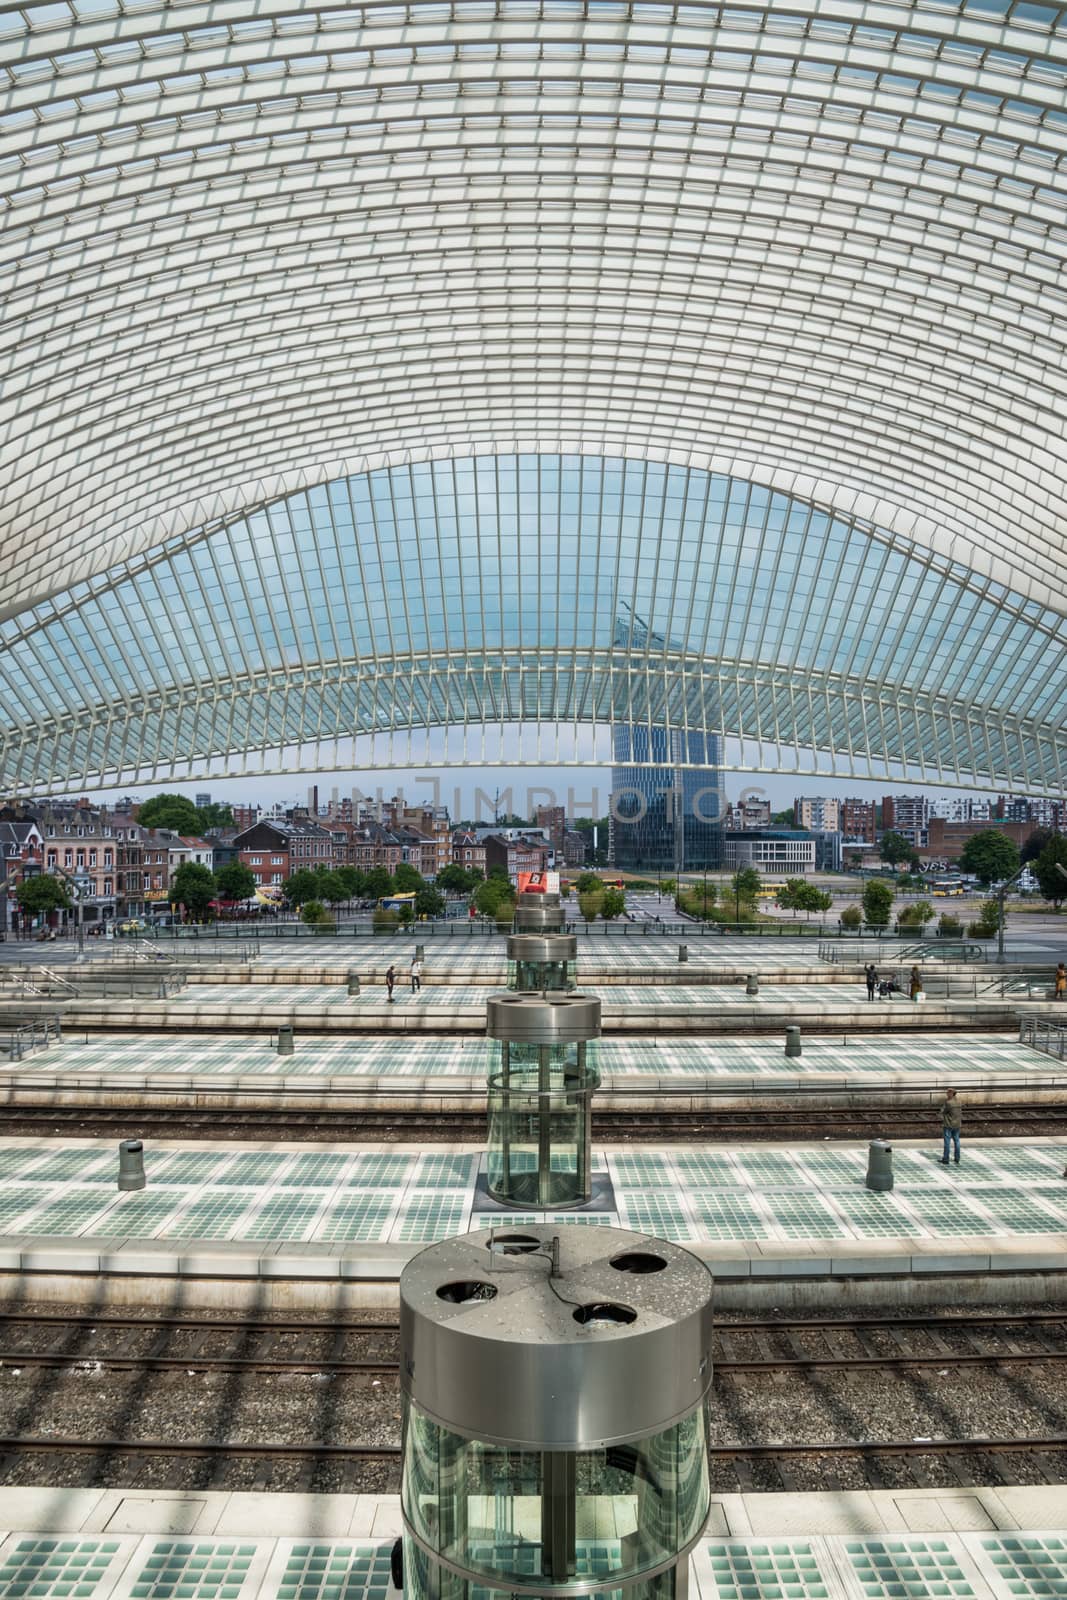 Inside Liege guillemins railway station looking towards city by MXW_Stock